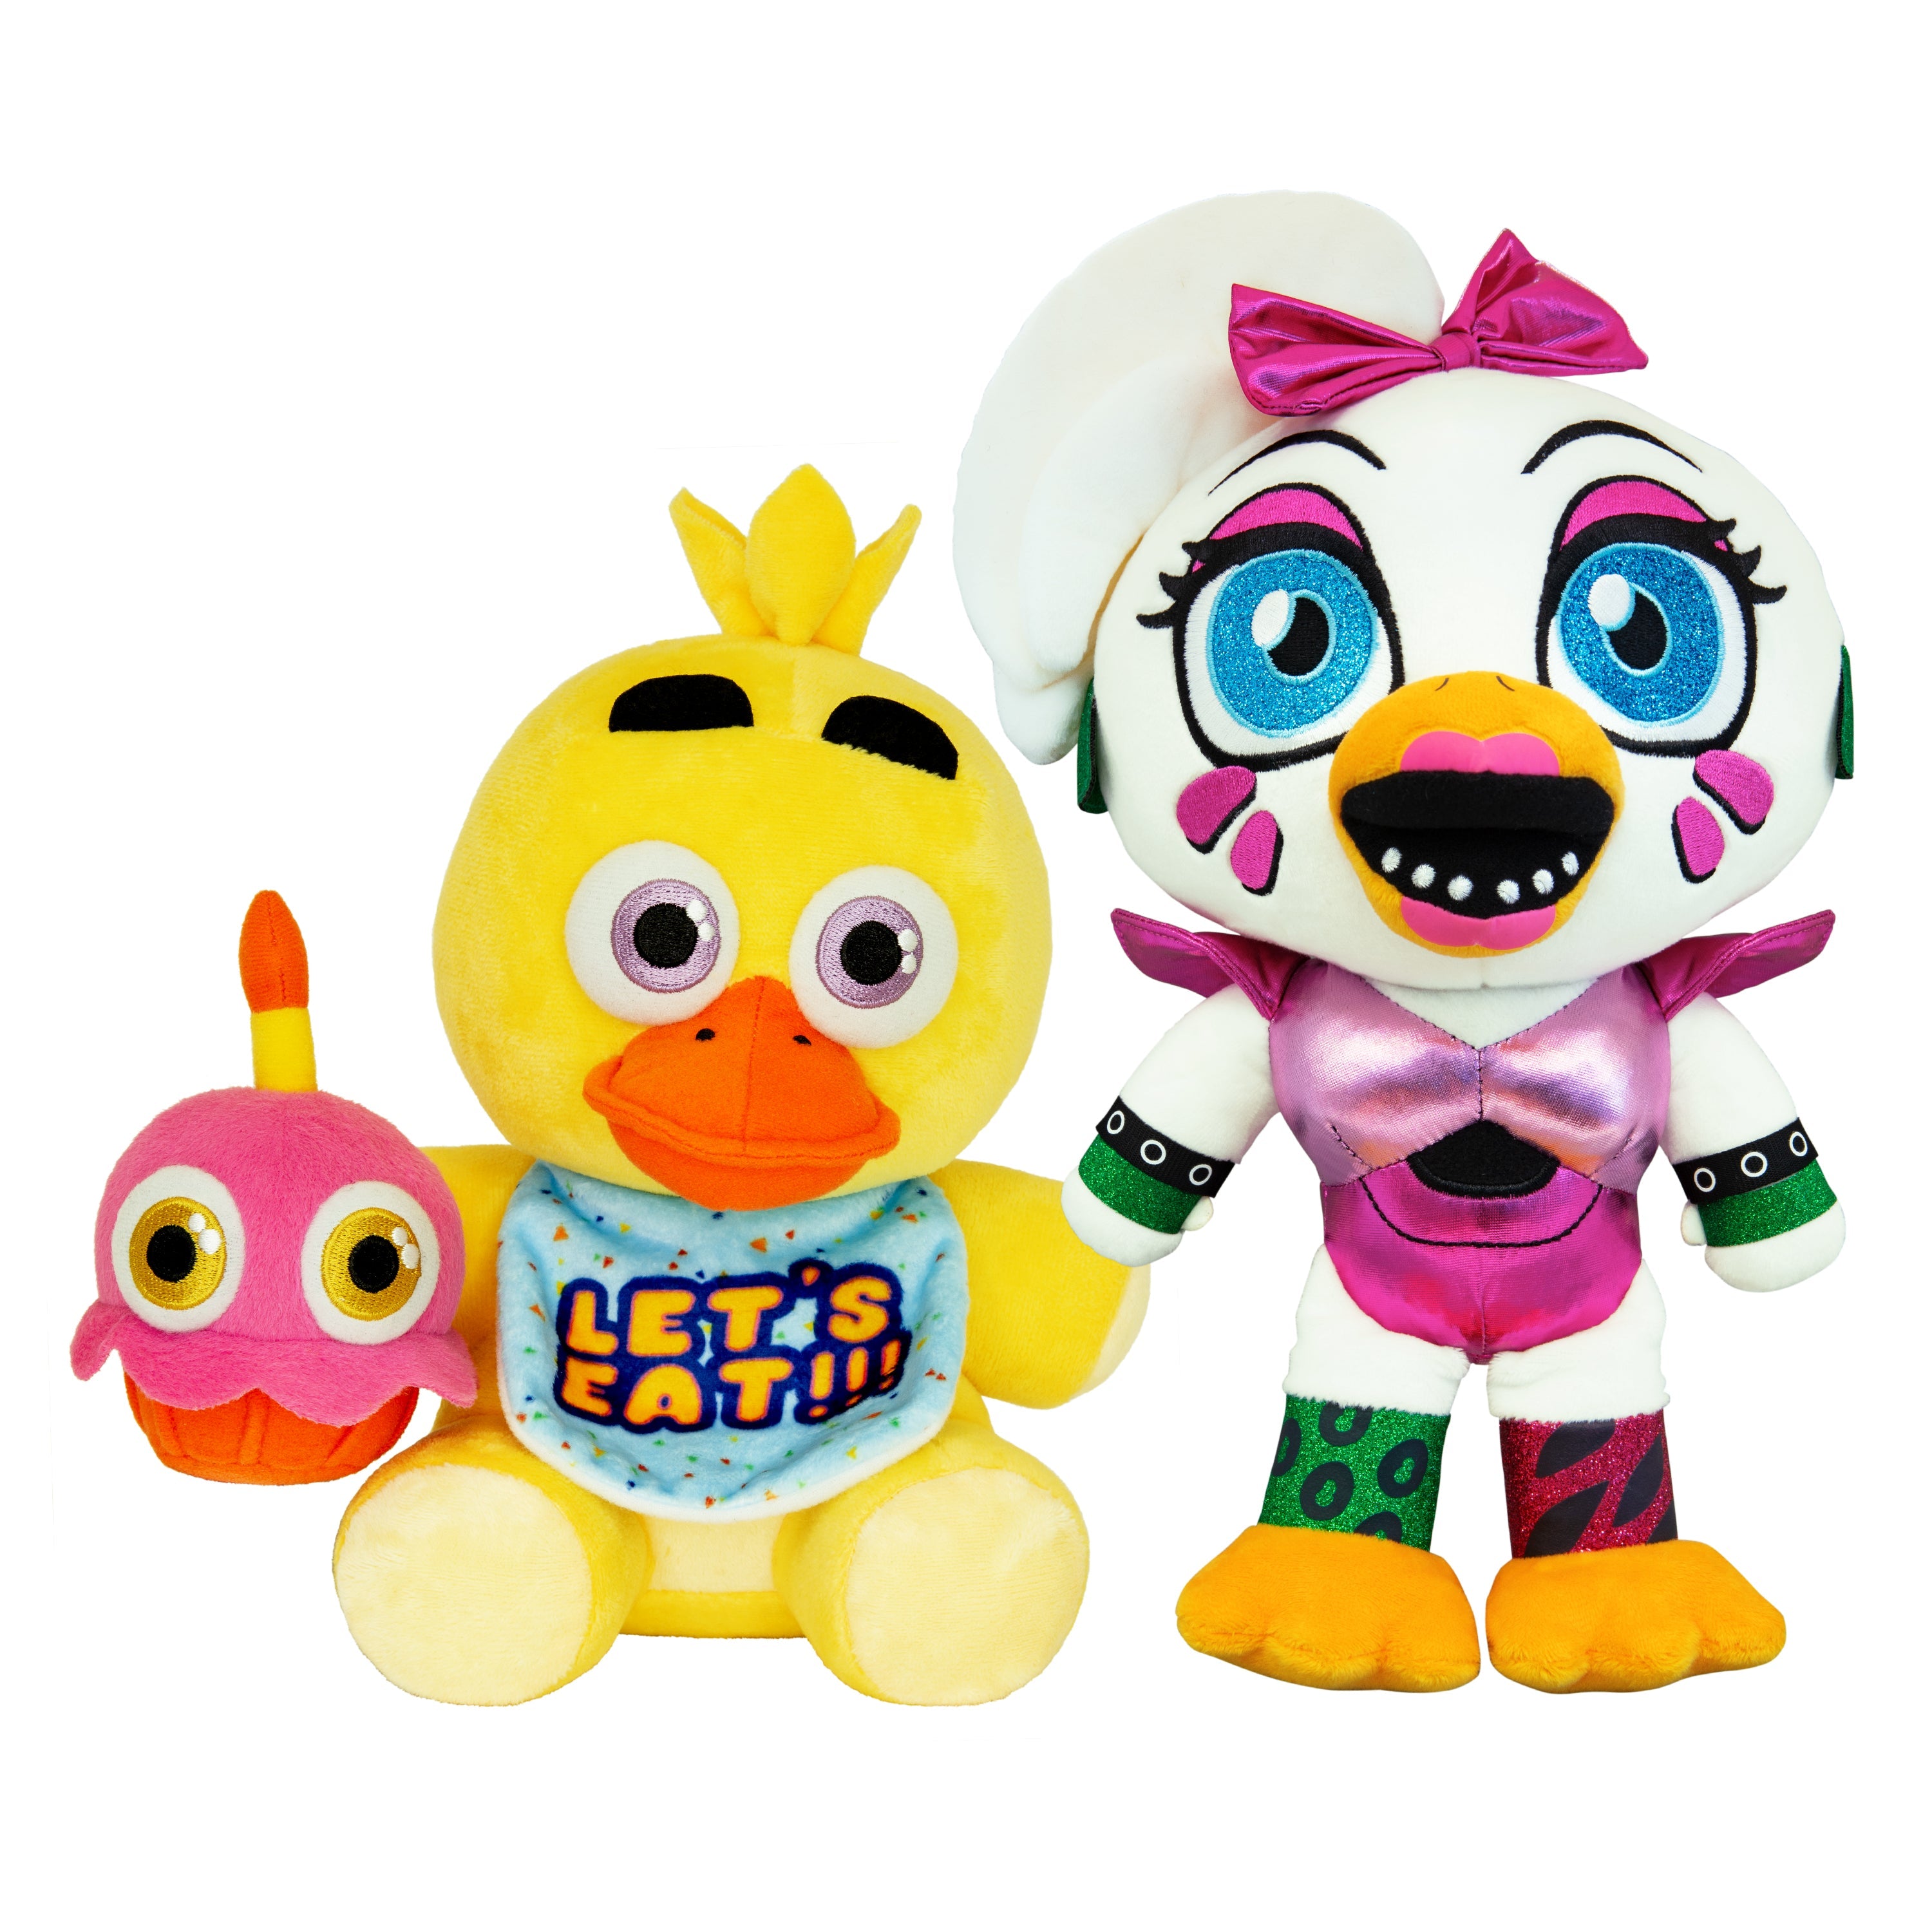 Peluche - Five Nights at Freddy's peluche Glamrock Chica Sit